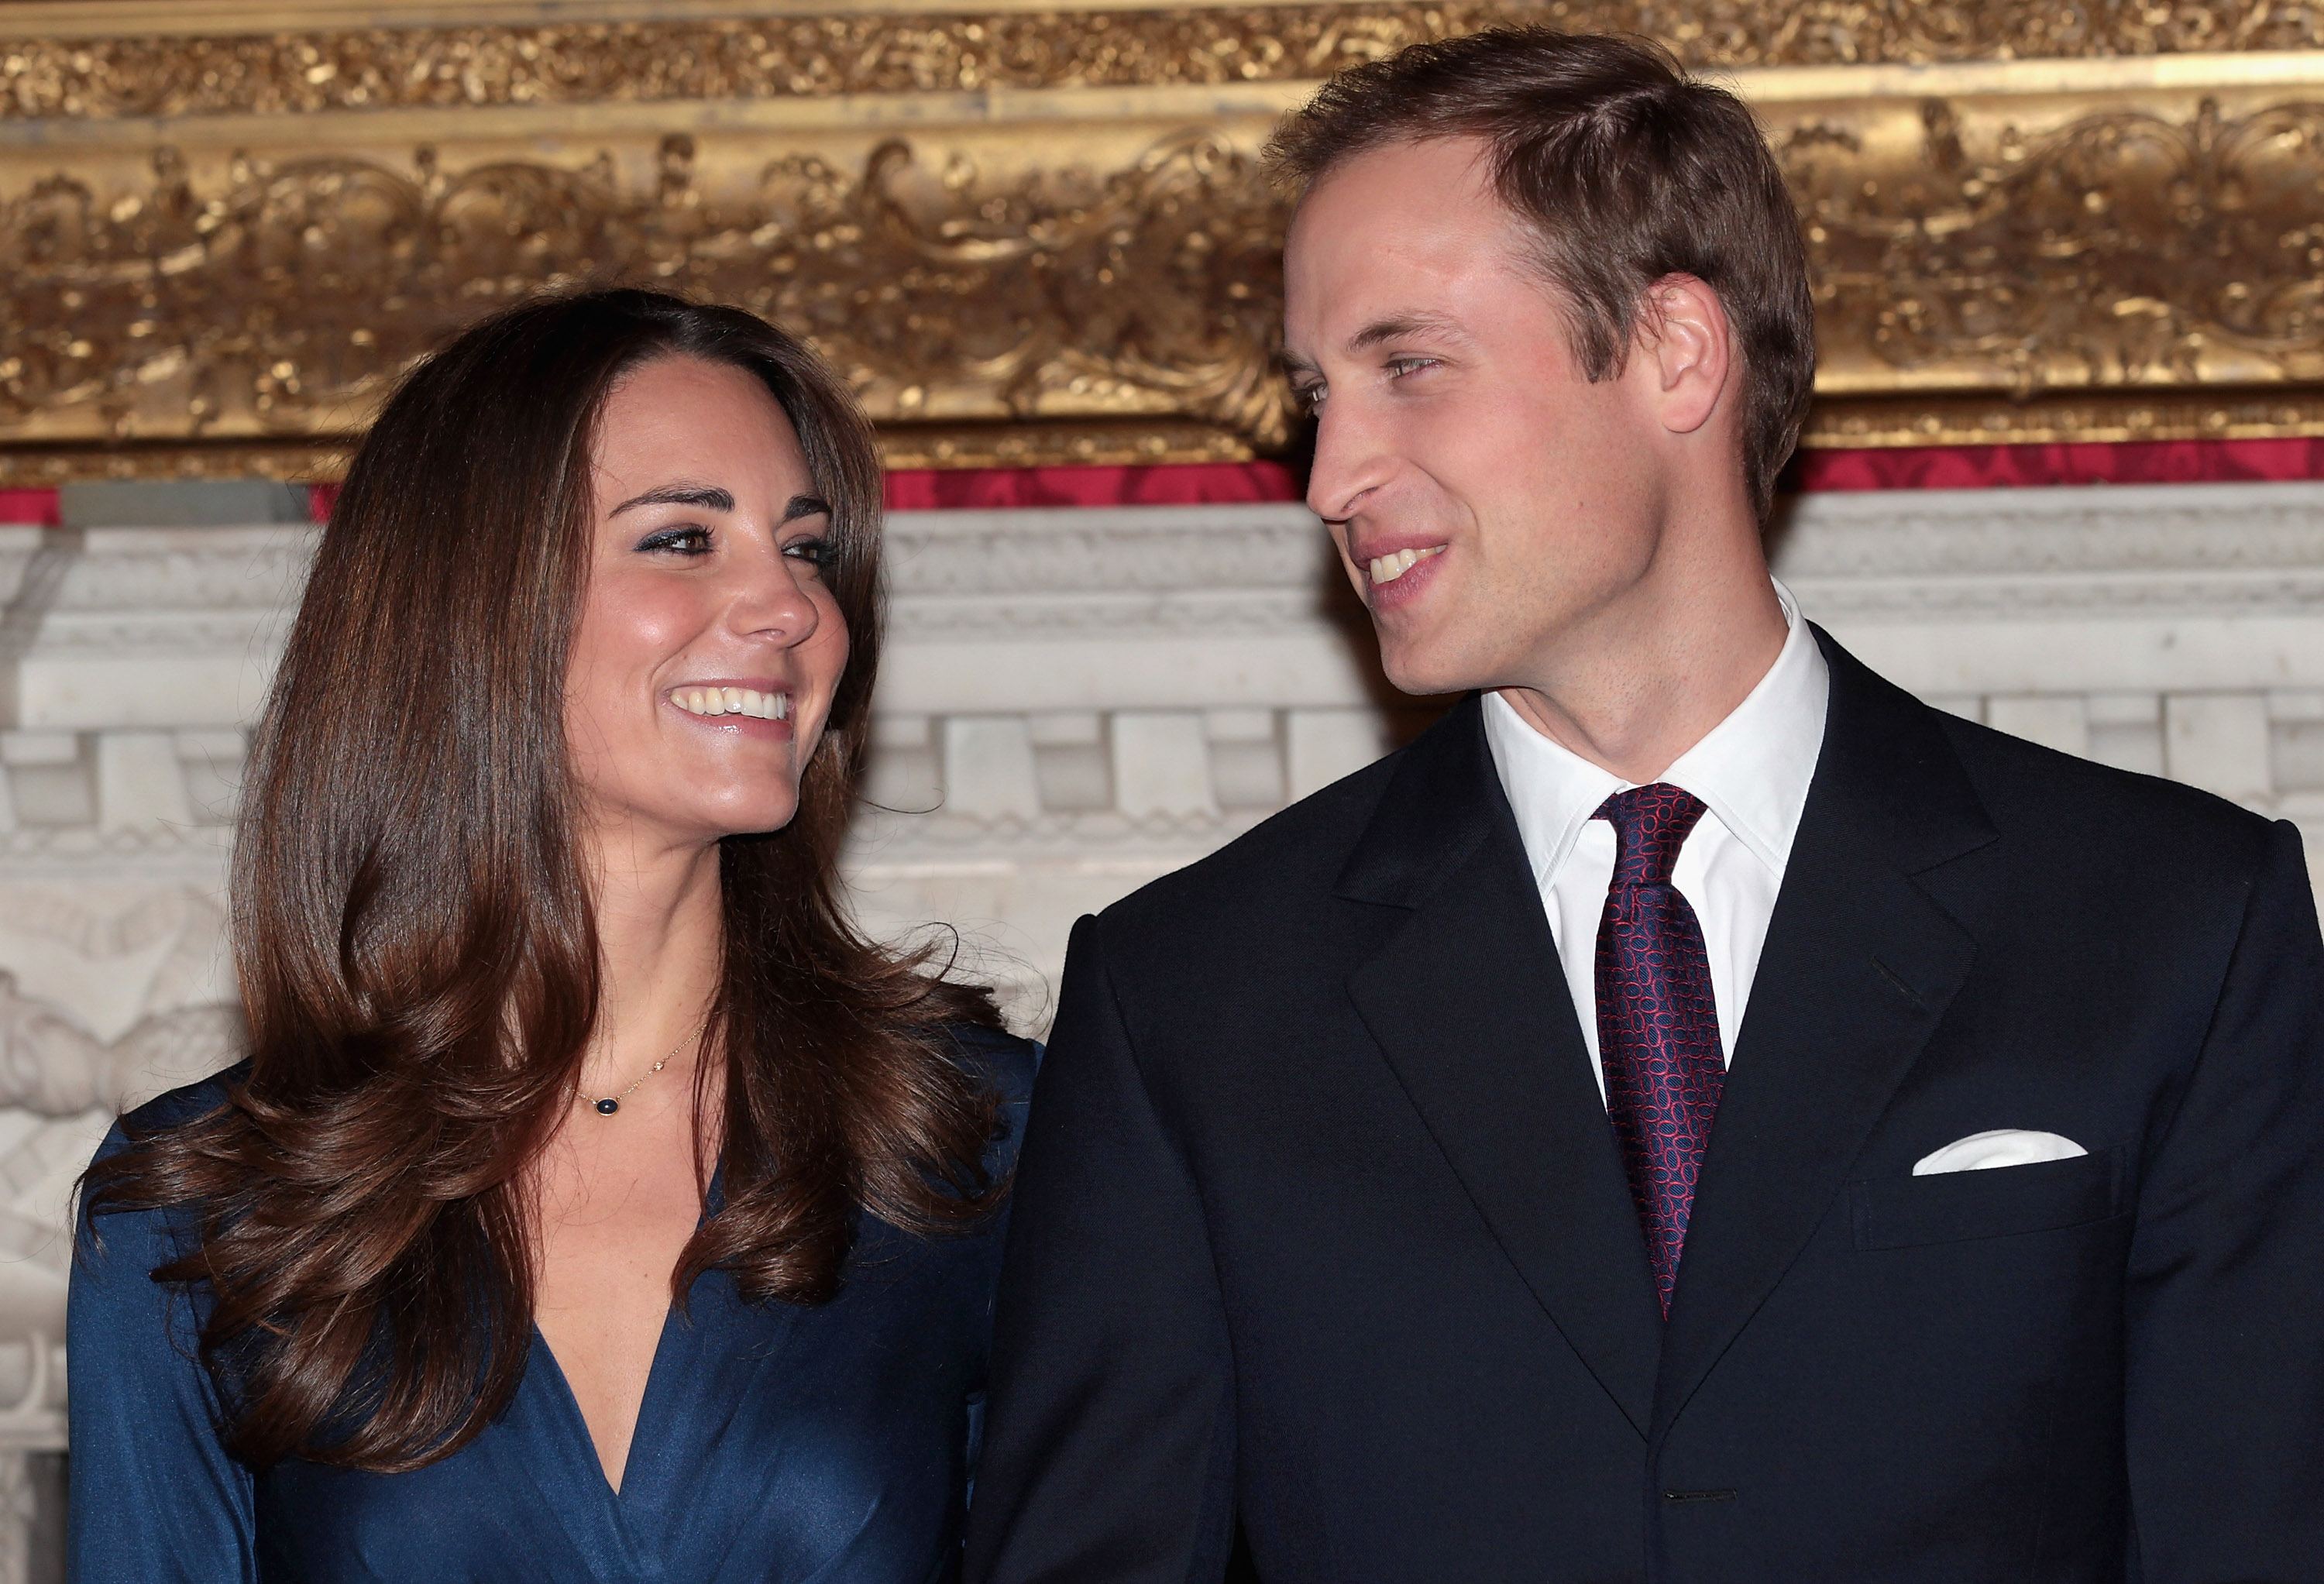 Kate Middleton and Prince William pose in the State Apartments of St James Palace in London, England on November 16, 2010 | Source: Getty Images